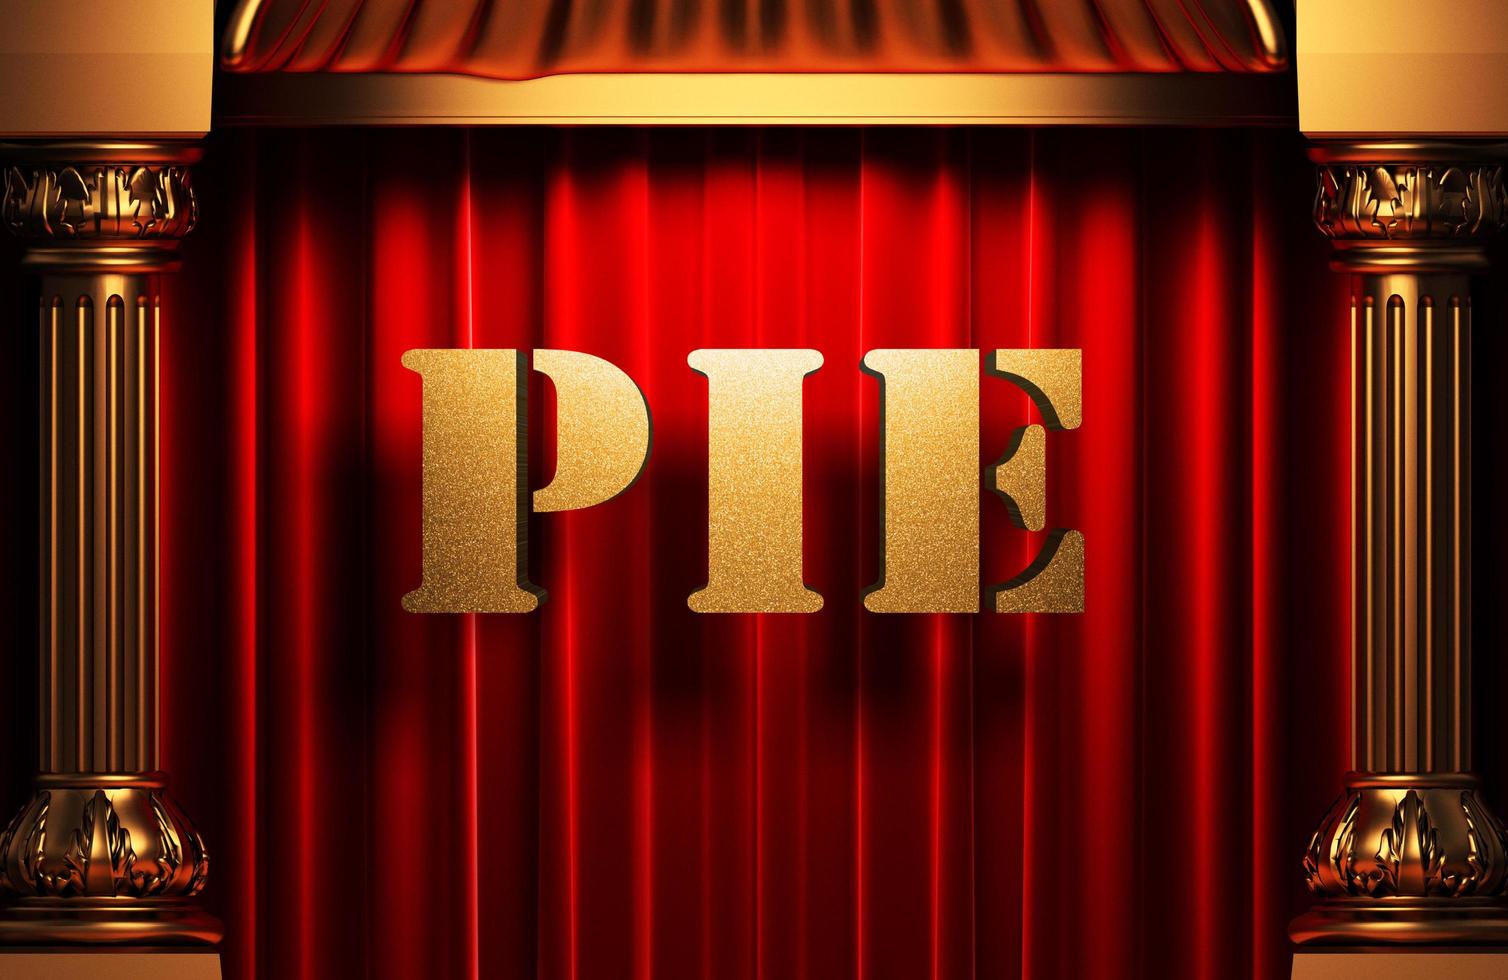 pie golden word on red curtain photo